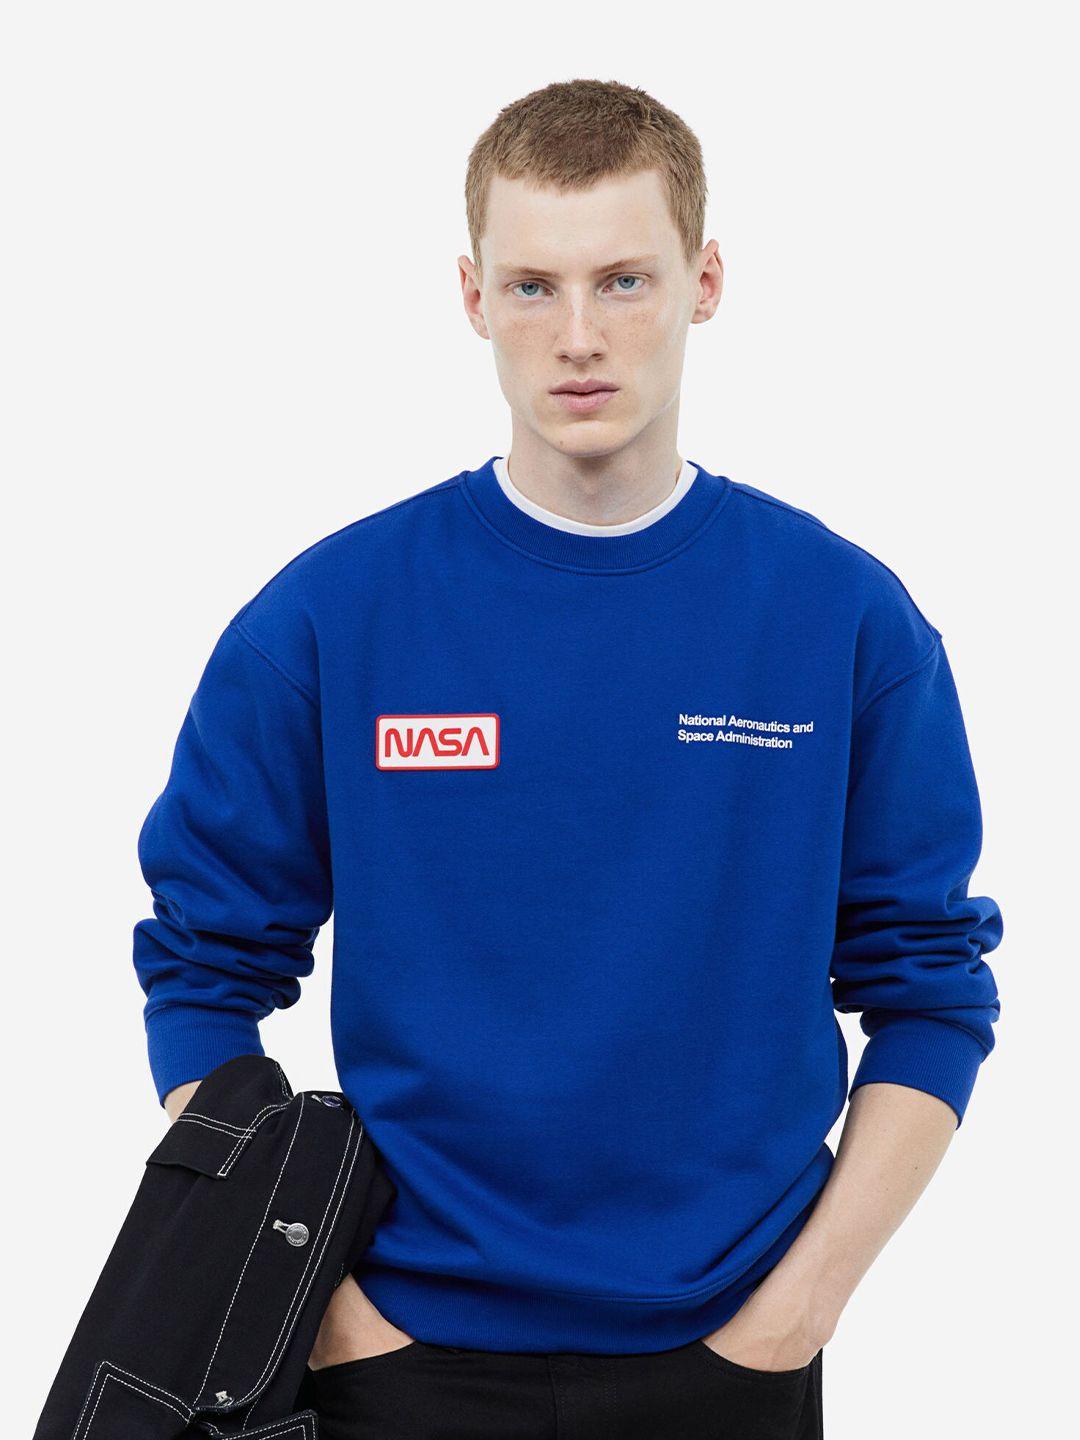 h&m relaxed fit sweatshirt